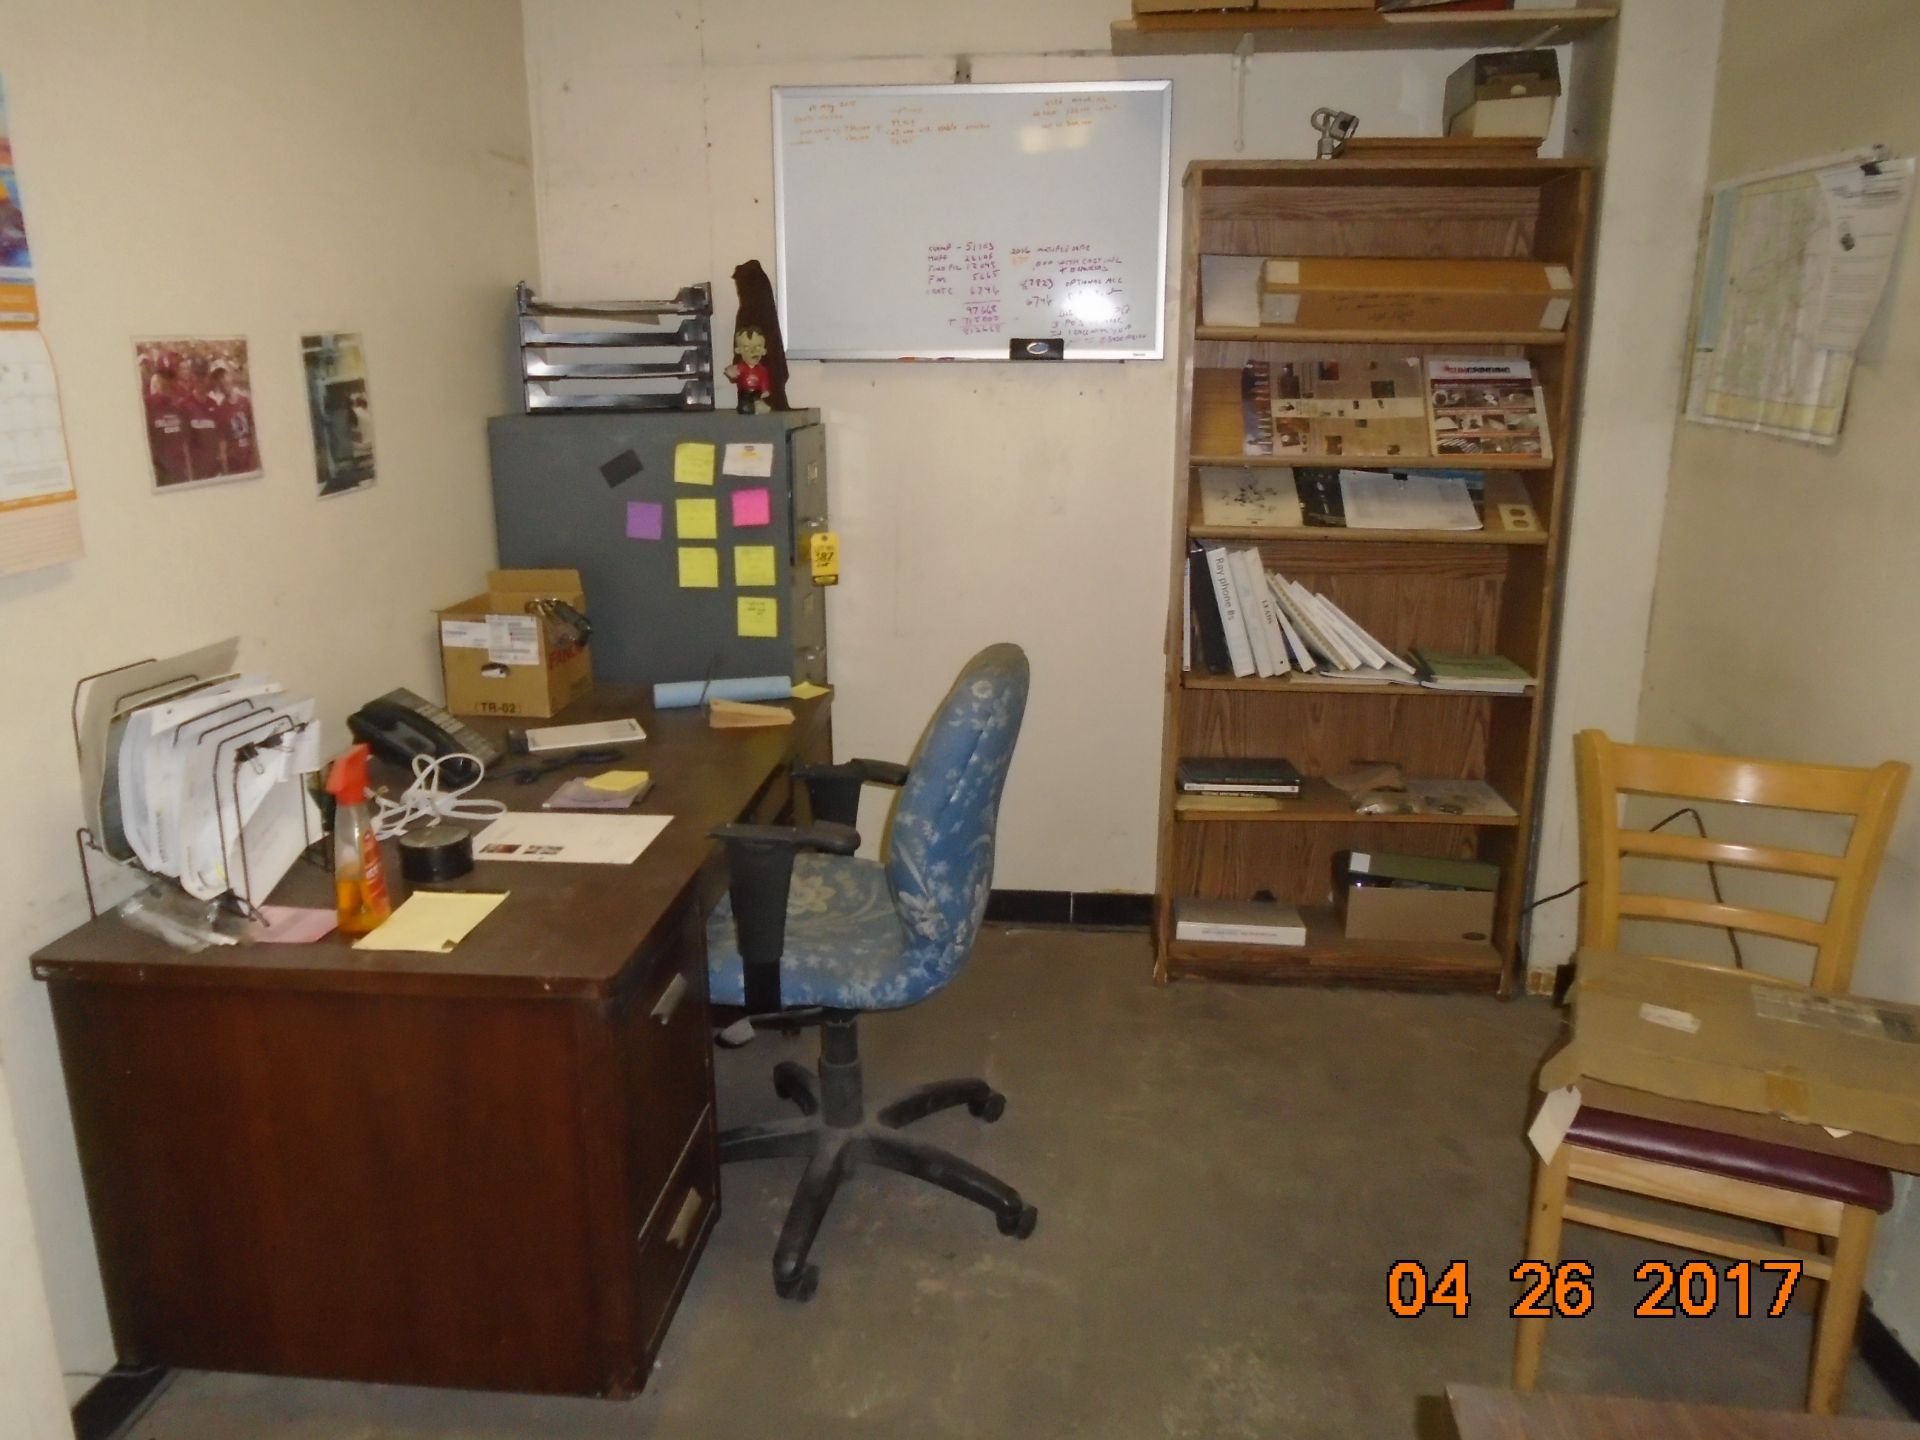 LOT DESKS, SHELVES, CHAIRS IN ROOM - Image 2 of 2